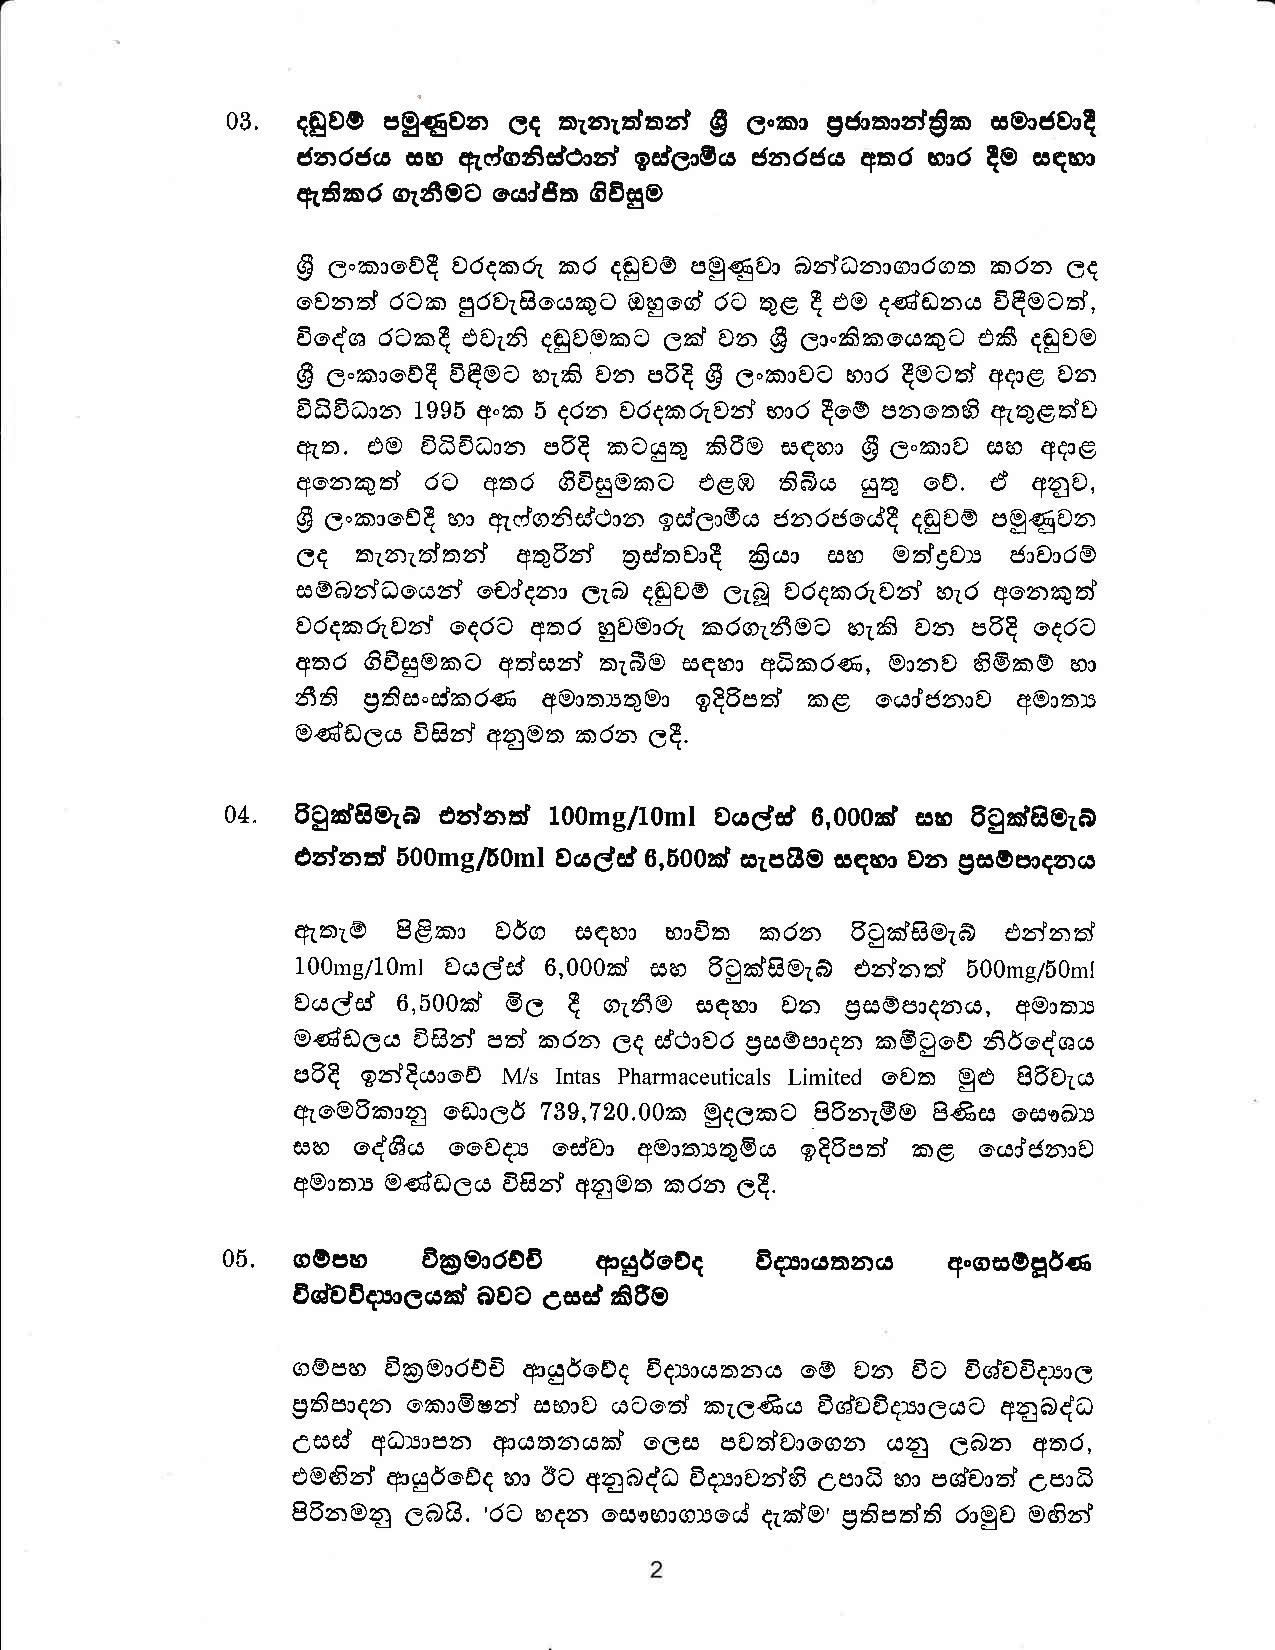 Cabinet Decision on 08.07.2020S page 002